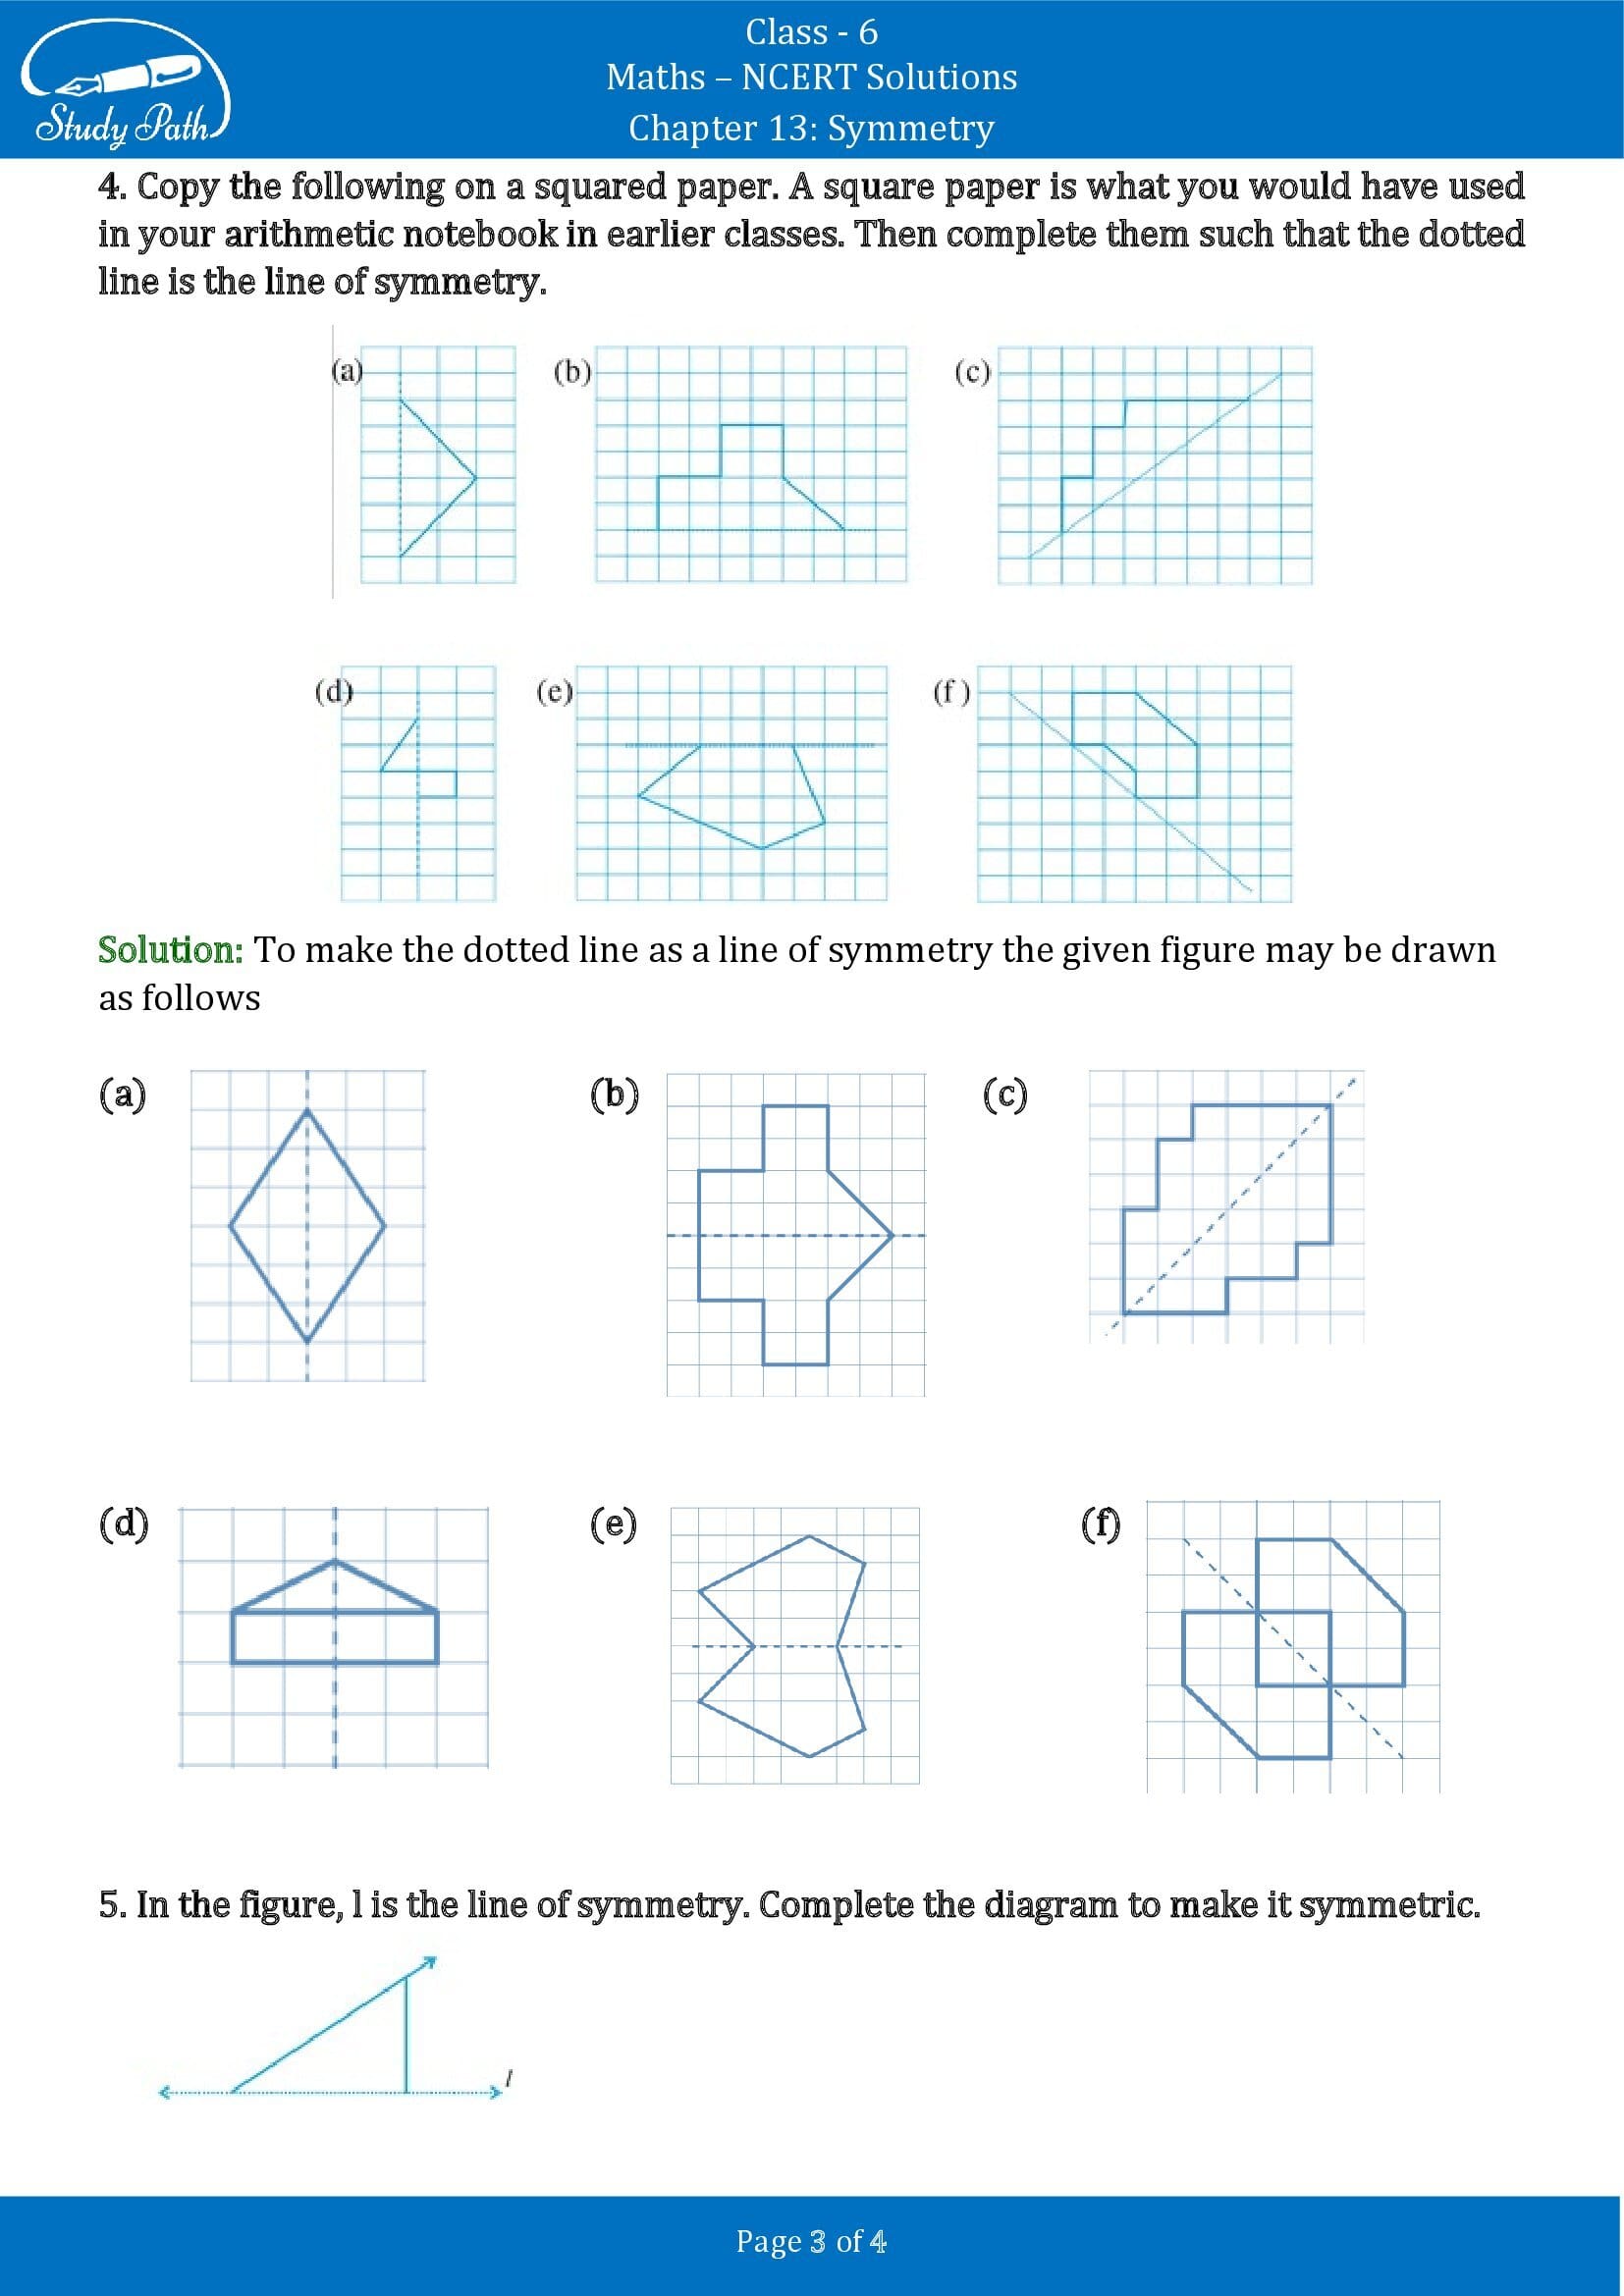 NCERT Solutions for Class 6 Maths Chapter 13 Symmetry Exercise 13.1 00003